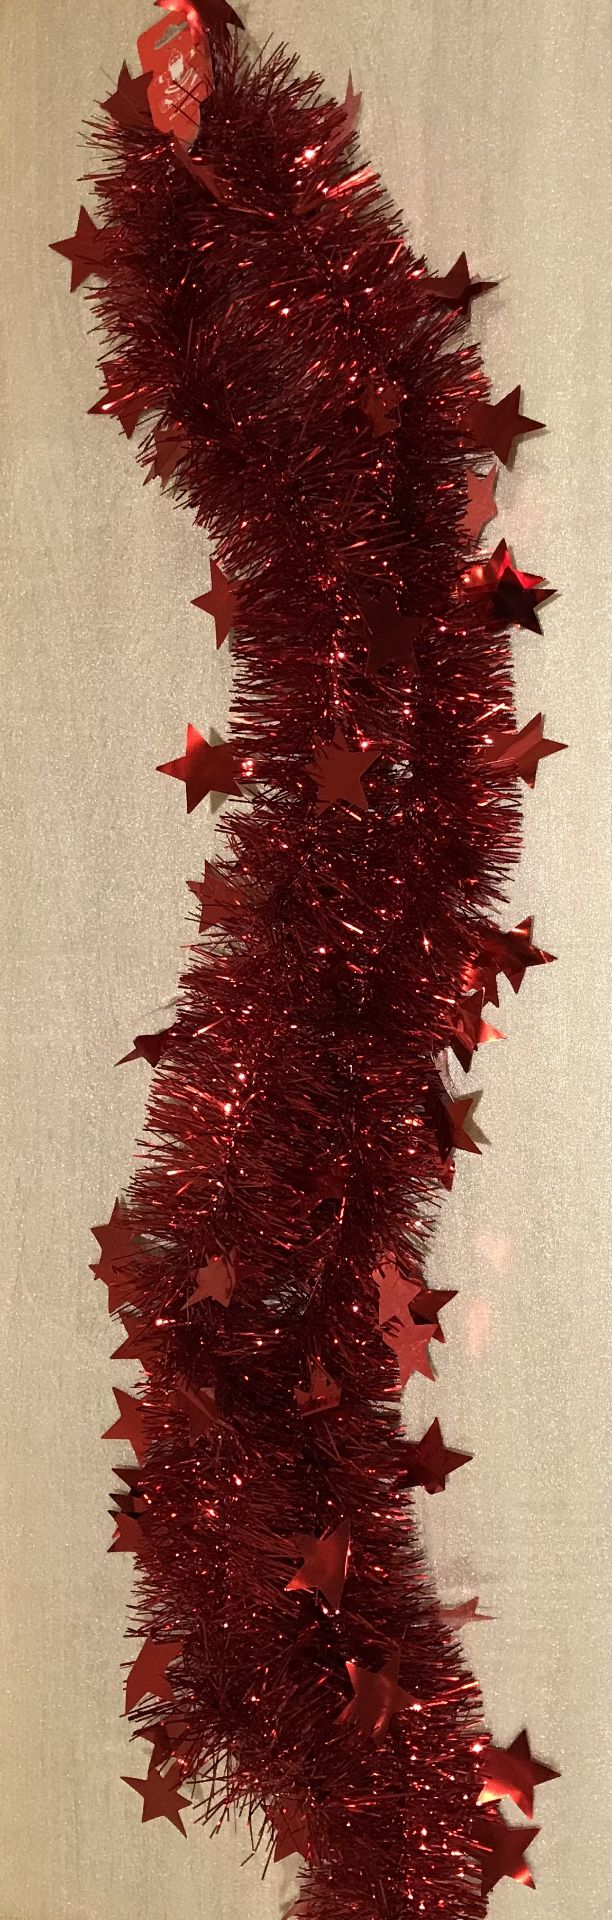 500 X Tinsel With Stars 1.8M Long 5 Colours Gold, Silver, Red, Blue, Green - Image 5 of 6